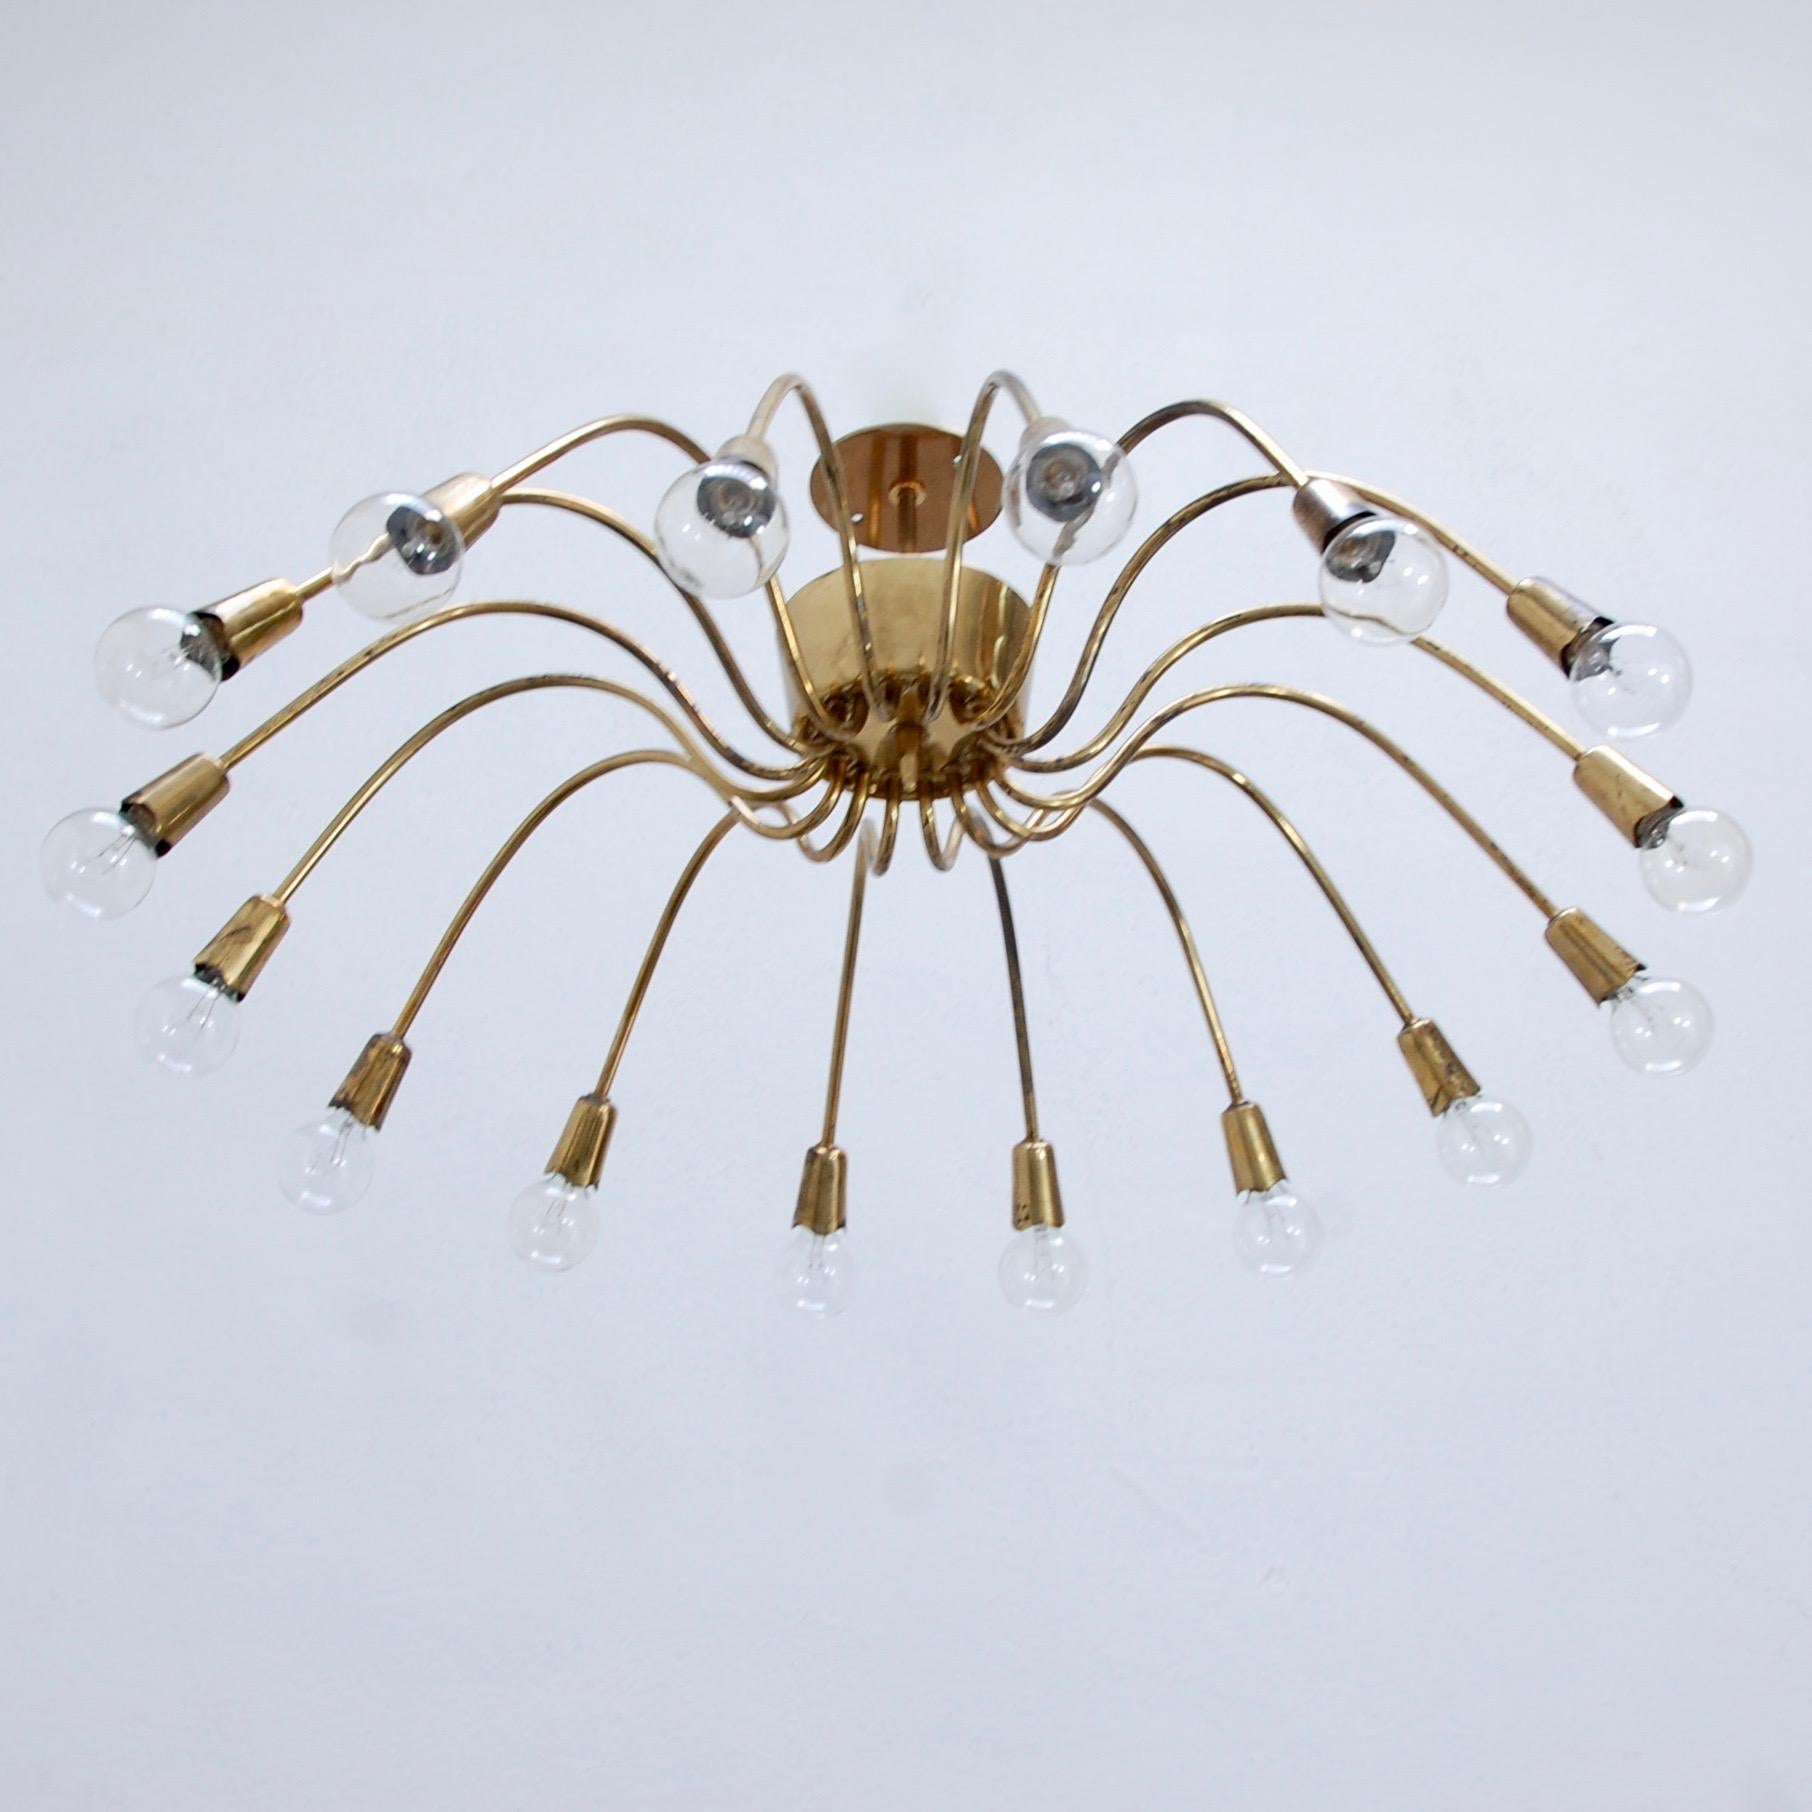 Excellent Gino Sarfatti for Arteluce 1940s Italian modern flush mount fixture. Original patinated aged brass finish. Partially restored. Wired for the US with (16) E12 candelabra based sockets. Model #2023 from 1946.
Light bulbs and all mounting